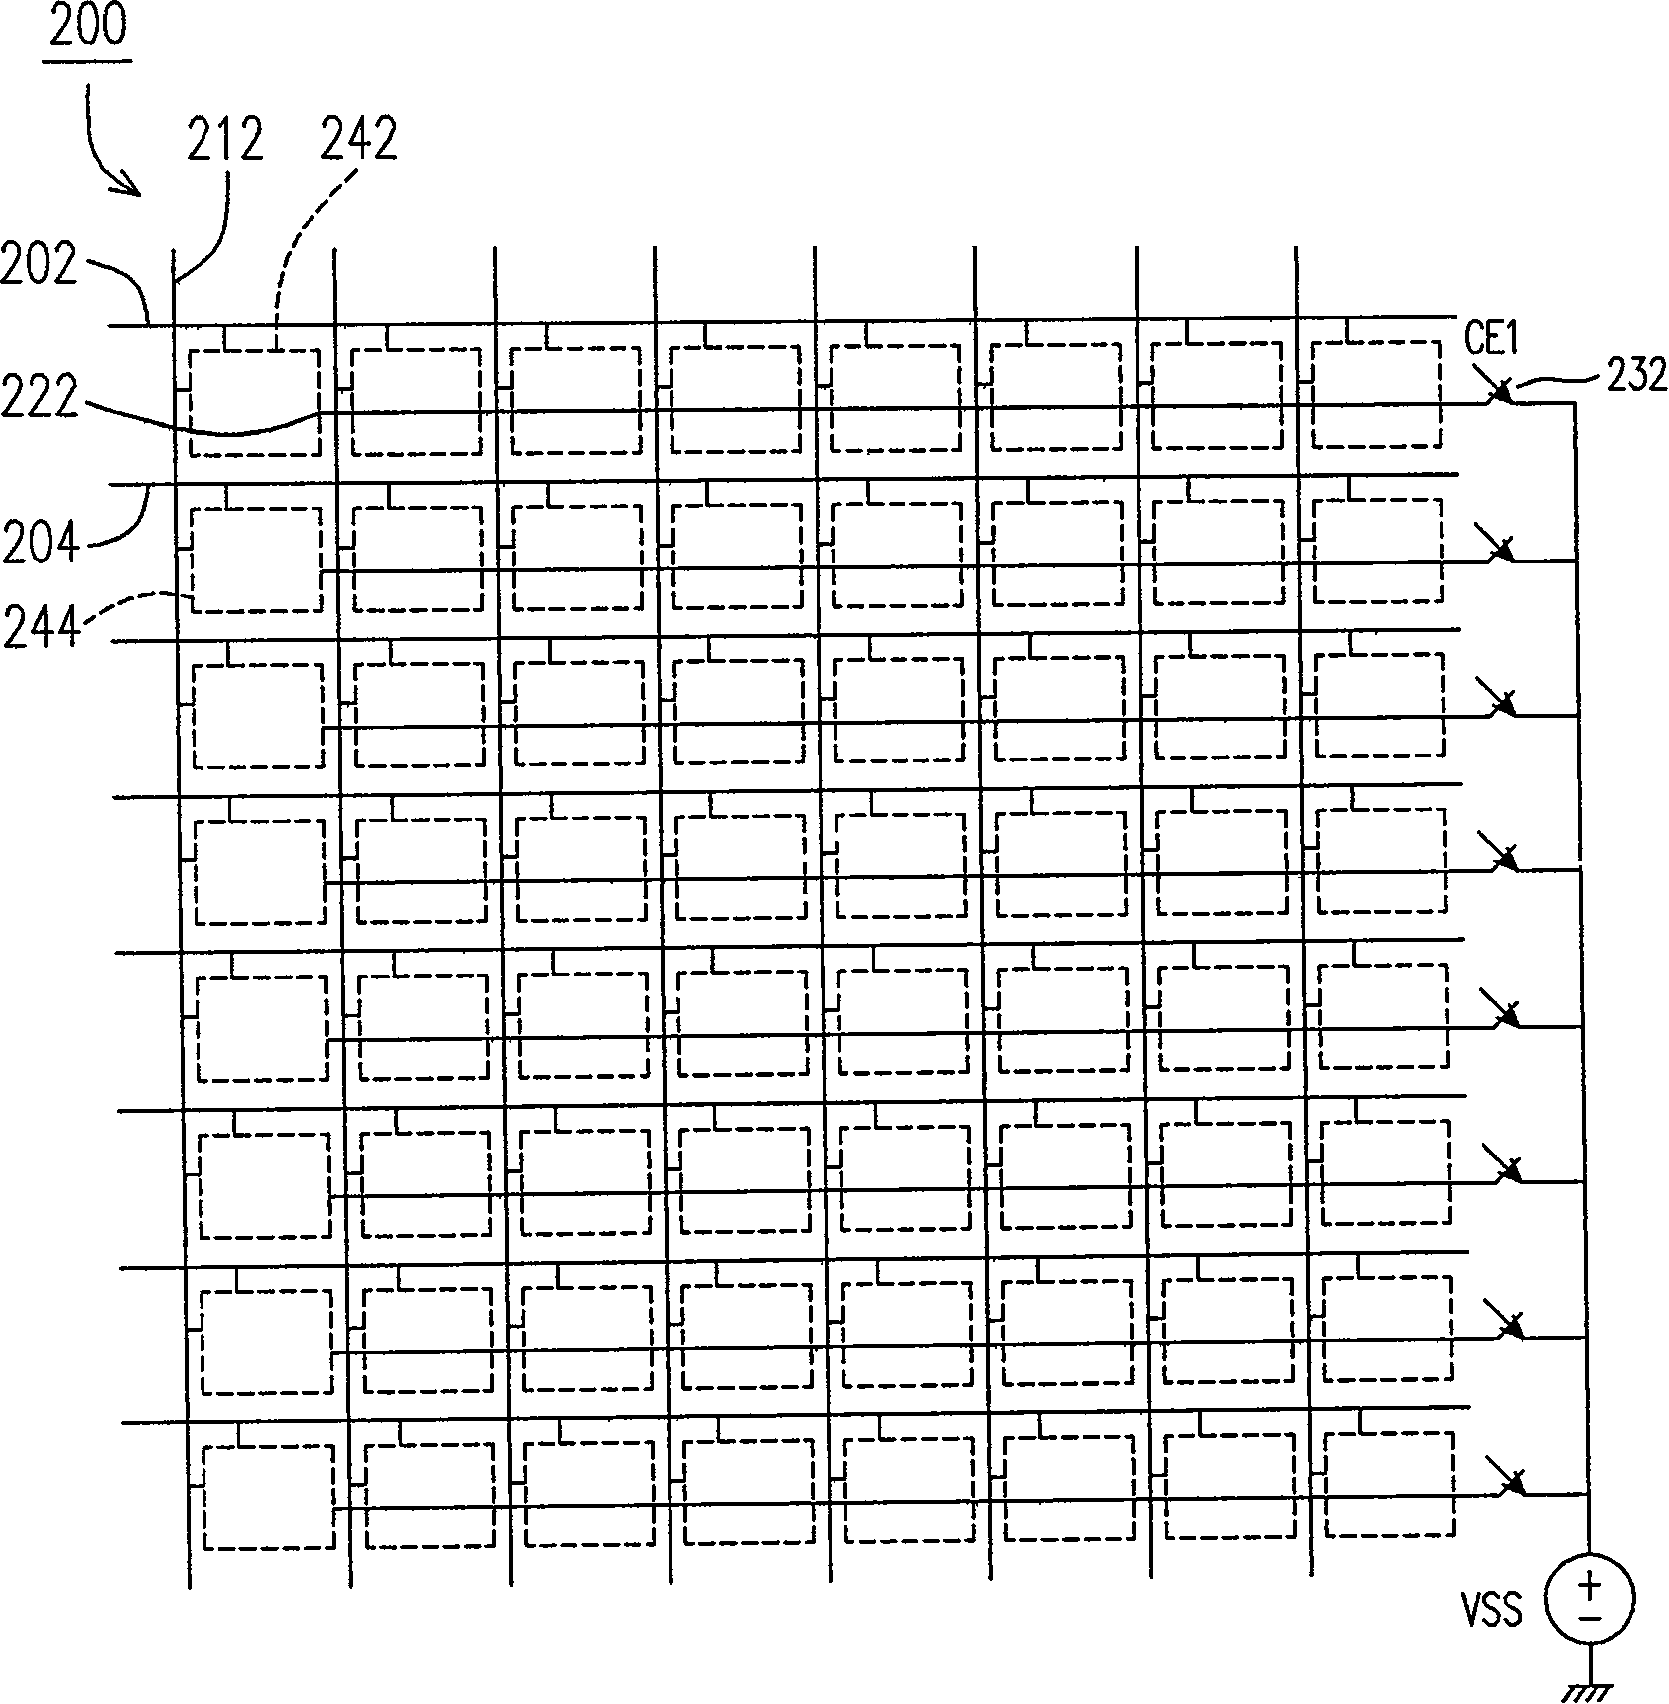 Display panel and its structure